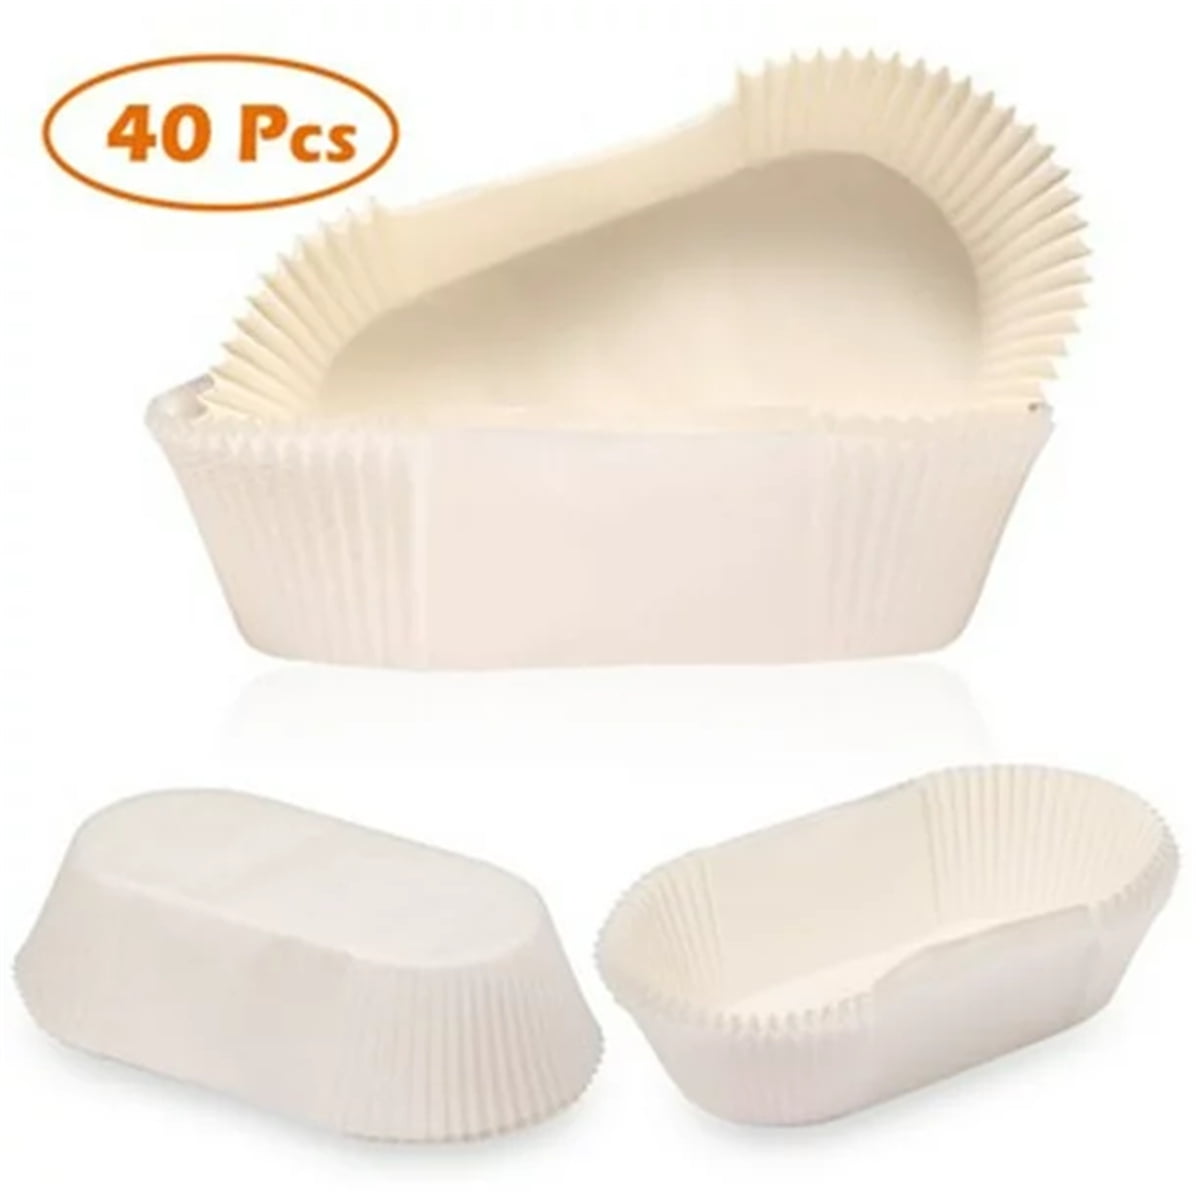 Happon 40 Pcs Loaf Bread Baking Liners, Paper Loaf Pan Liners, Disposable  Greaseproof Baking Cups Tin Liners for Cakes, Snacks, Cupcakes, Muffins,  Weddings, Parties, White 